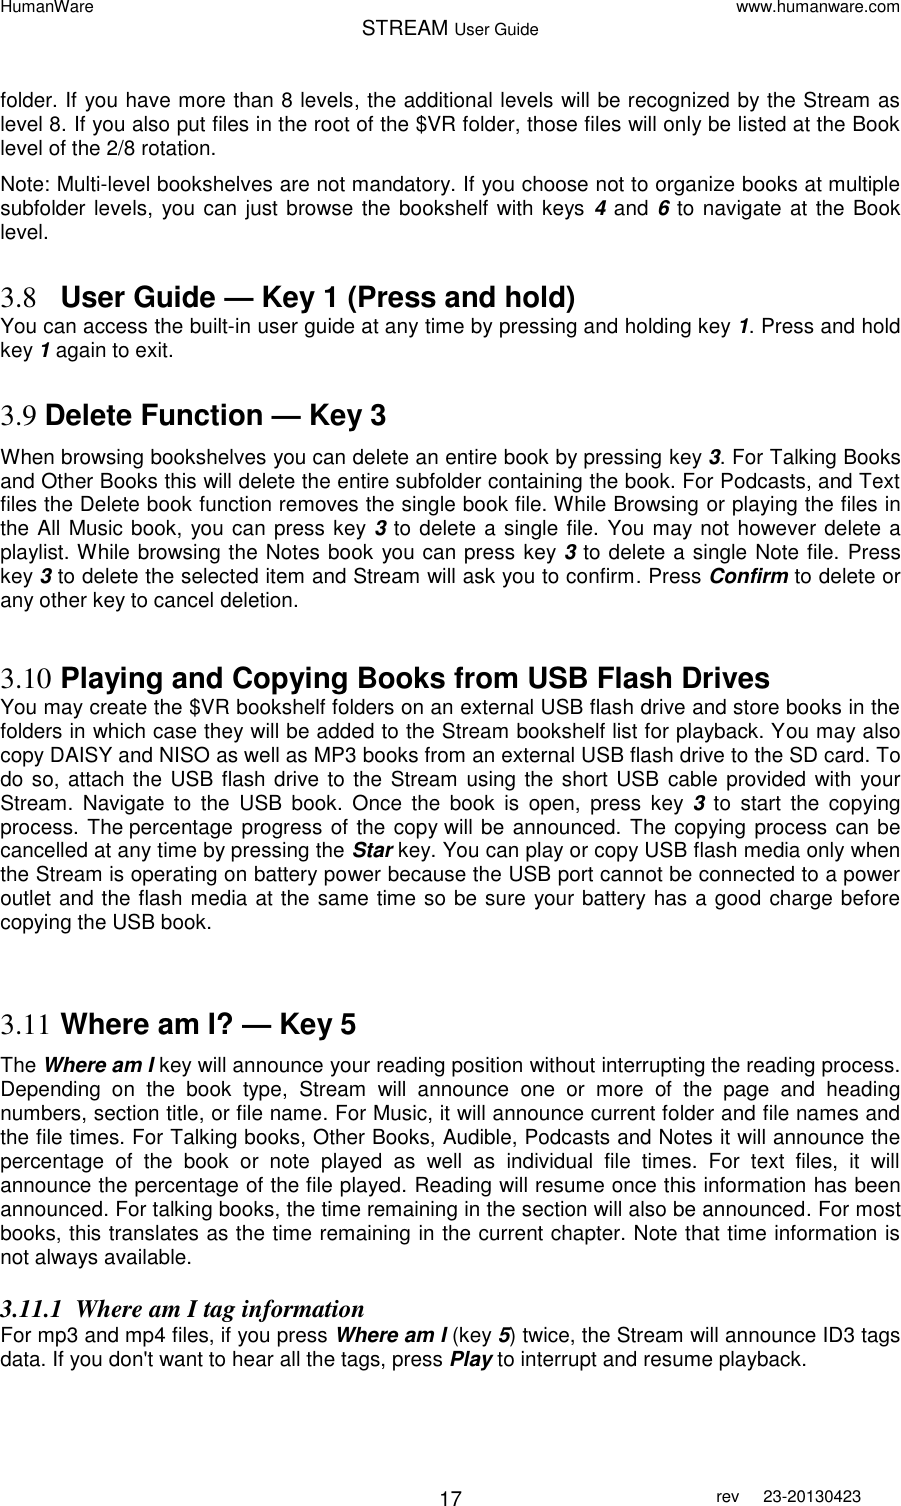 HumanWare www.humanware.com STREAM User Guide        17 rev  23-20130423   folder. If you have more than 8 levels, the additional levels will be recognized by the Stream as level 8. If you also put files in the root of the $VR folder, those files will only be listed at the Book level of the 2/8 rotation. Note: Multi-level bookshelves are not mandatory. If you choose not to organize books at multiple subfolder levels,  you can just browse the bookshelf with keys 4 and 6 to navigate at the Book level.  3.8 User Guide — Key 1 (Press and hold) You can access the built-in user guide at any time by pressing and holding key 1. Press and hold key 1 again to exit.   3.9 Delete Function — Key 3 When browsing bookshelves you can delete an entire book by pressing key 3. For Talking Books and Other Books this will delete the entire subfolder containing the book. For Podcasts, and Text files the Delete book function removes the single book file. While Browsing or playing the files in the All Music book, you can press key 3 to delete a single file. You may not however delete a playlist. While browsing the Notes book you can press key 3 to delete a single Note file. Press key 3 to delete the selected item and Stream will ask you to confirm. Press Confirm to delete or any other key to cancel deletion.  3.10 Playing and Copying Books from USB Flash Drives You may create the $VR bookshelf folders on an external USB flash drive and store books in the folders in which case they will be added to the Stream bookshelf list for playback. You may also copy DAISY and NISO as well as MP3 books from an external USB flash drive to the SD card. To do so, attach the USB flash drive to the Stream using the short USB cable provided with  your Stream.  Navigate  to  the  USB  book.  Once  the  book  is  open,  press  key  3  to  start  the  copying process. The percentage progress of the copy will be announced. The copying process can be cancelled at any time by pressing the Star key. You can play or copy USB flash media only when the Stream is operating on battery power because the USB port cannot be connected to a power outlet and the flash media at the same time so be sure your battery has a good charge before copying the USB book.   3.11 Where am I? — Key 5 The Where am I key will announce your reading position without interrupting the reading process. Depending  on  the  book  type,  Stream  will  announce  one  or  more  of  the  page  and  heading numbers, section title, or file name. For Music, it will announce current folder and file names and the file times. For Talking books, Other Books, Audible, Podcasts and Notes it will announce the percentage  of  the  book  or  note  played  as  well  as  individual  file  times.  For  text  files,  it  will announce the percentage of the file played. Reading will resume once this information has been announced. For talking books, the time remaining in the section will also be announced. For most books, this translates as the time remaining in the current chapter. Note that time information is not always available.  3.11.1 Where am I tag information For mp3 and mp4 files, if you press Where am I (key 5) twice, the Stream will announce ID3 tags data. If you don&apos;t want to hear all the tags, press Play to interrupt and resume playback. 